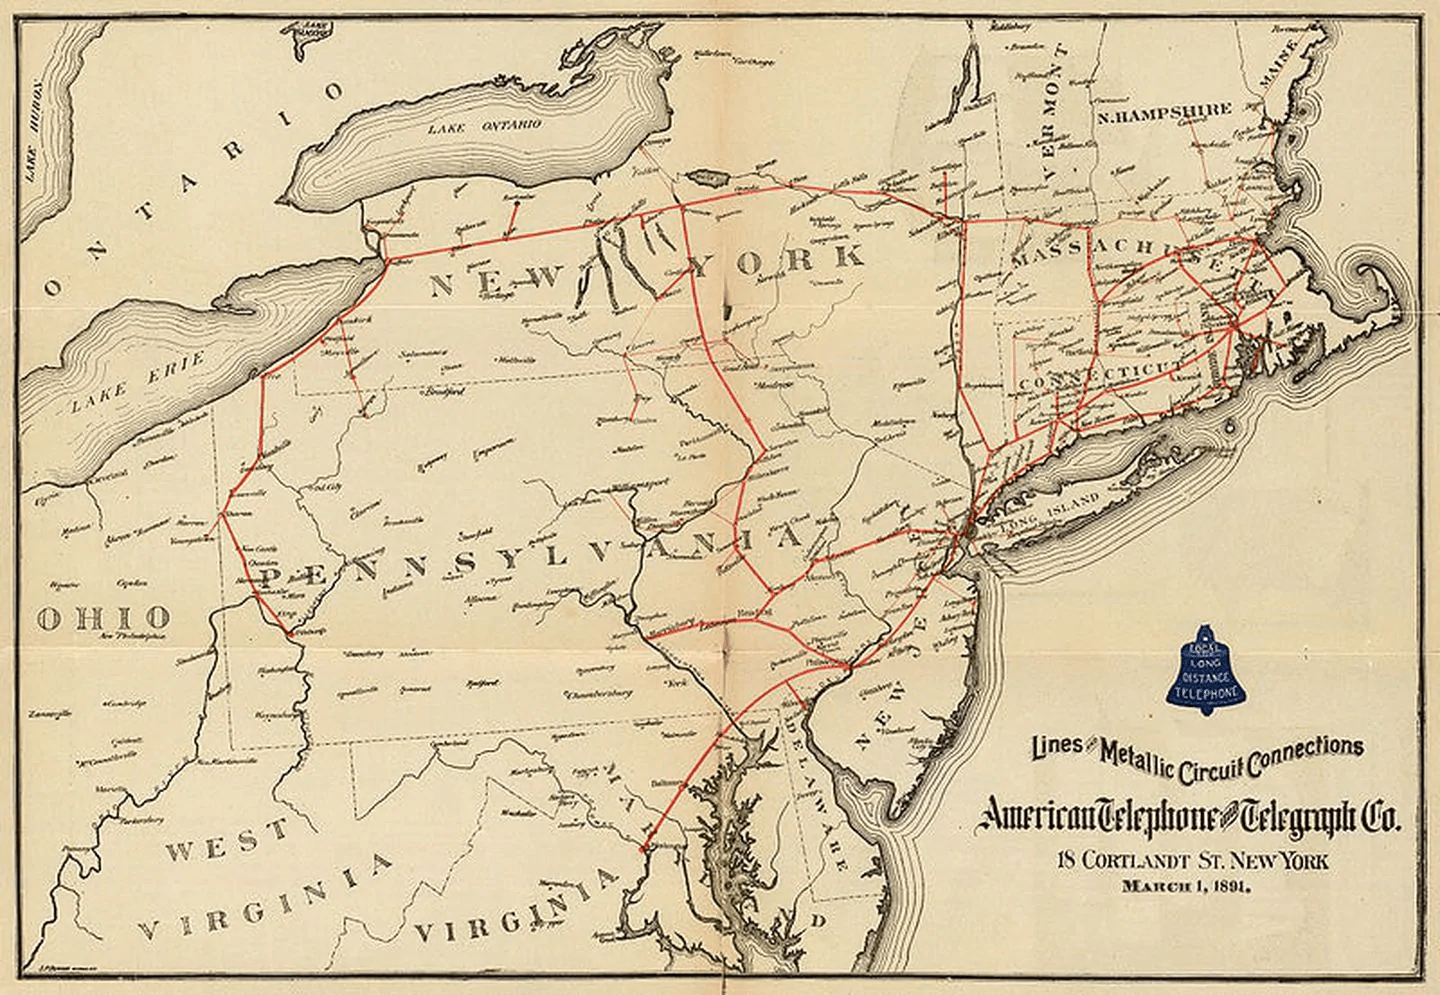 Old American telephone and telegraph company map